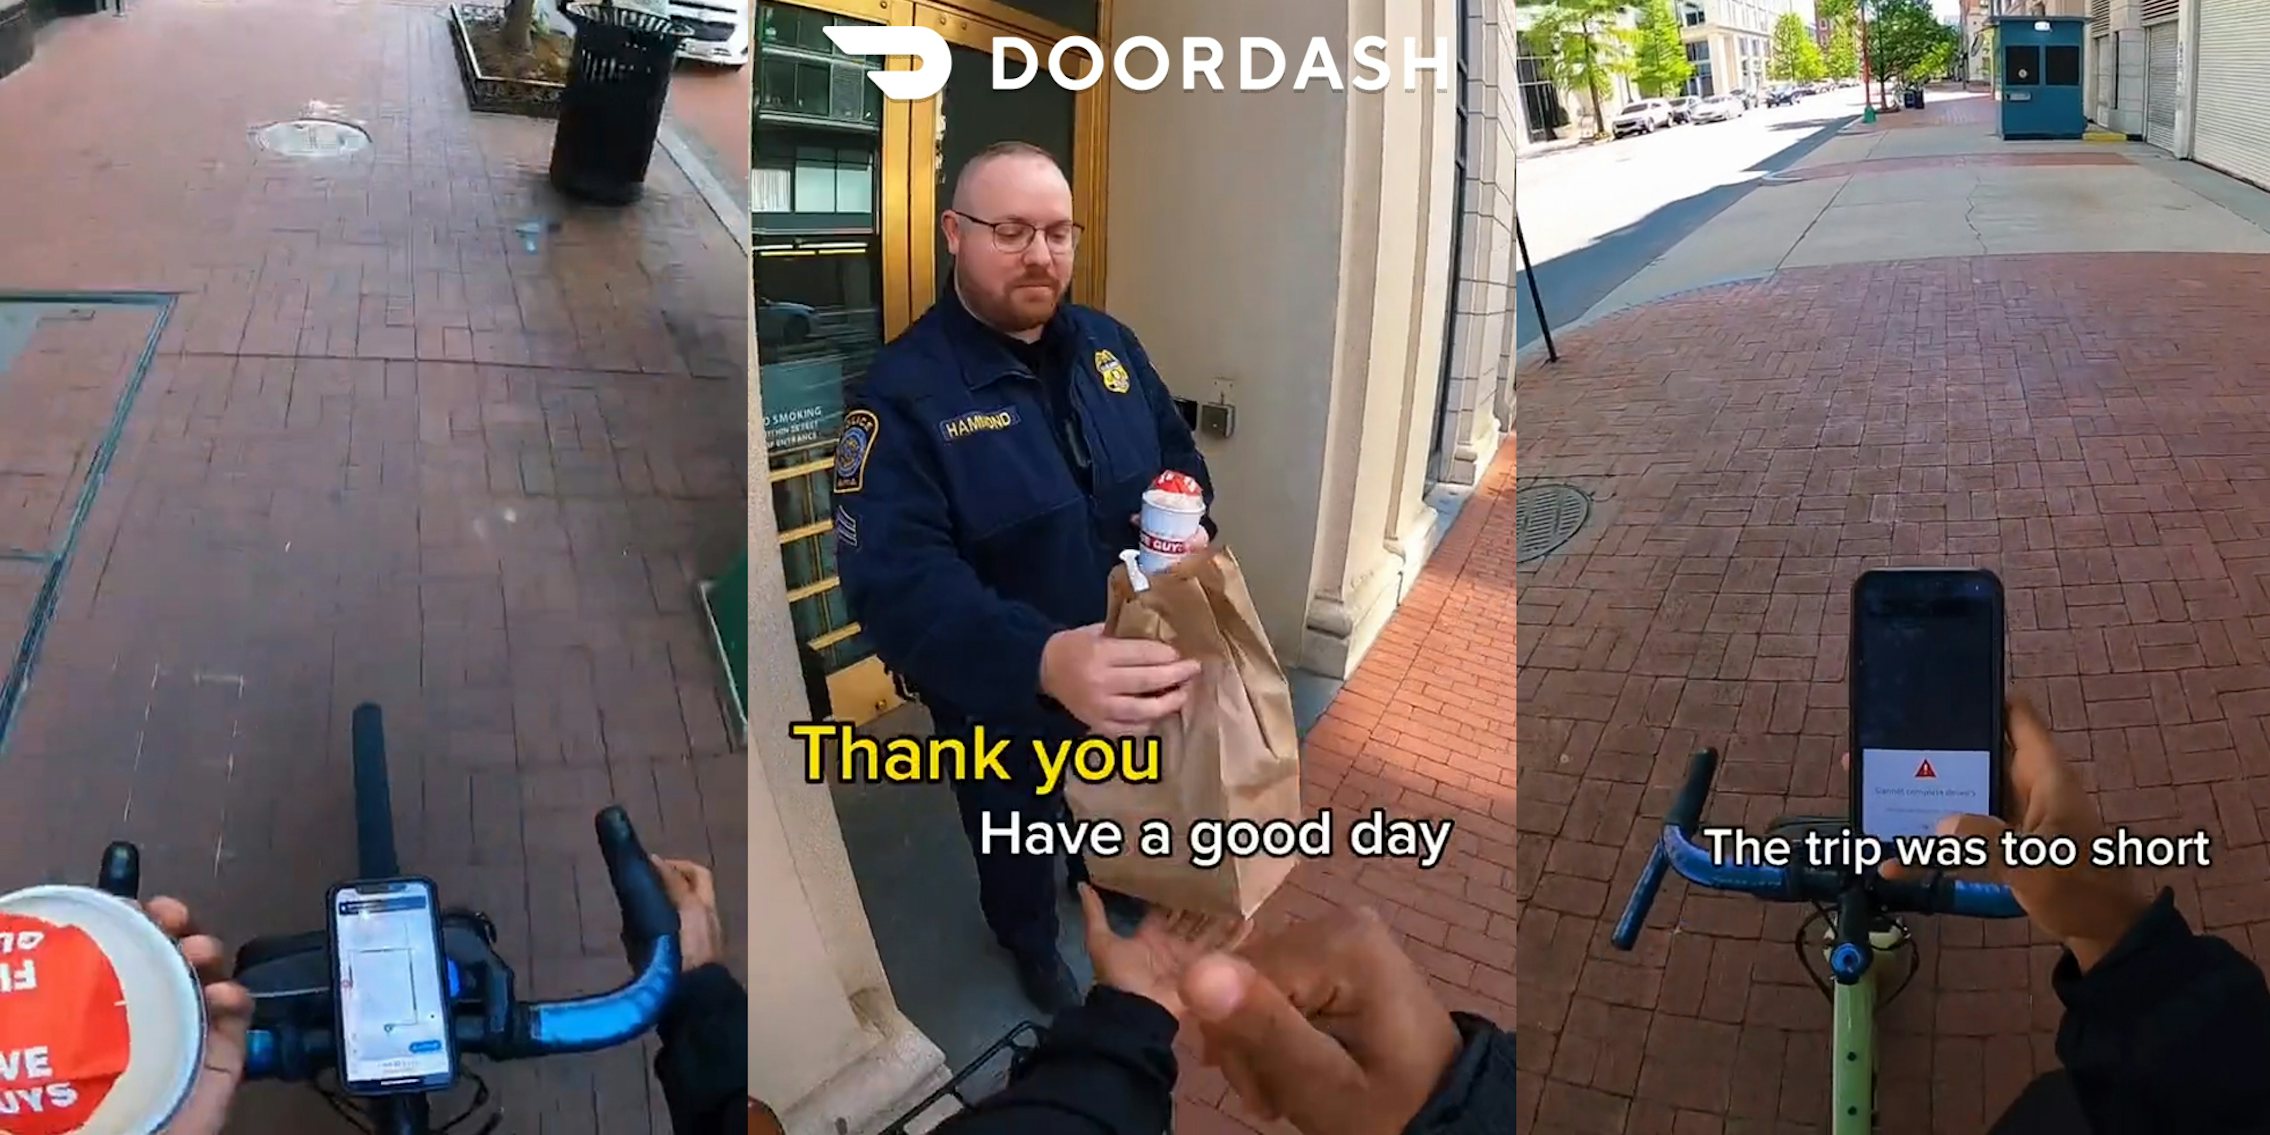 DoorDasher on bike delivering Five Guys (l) DoorDash customer receiving delivery with caption 'Thank you Have a good day' with DoorDash logo above (c) DoorDasher on bike using DoorDash app on phone with caption 'The trip was too short' (r)